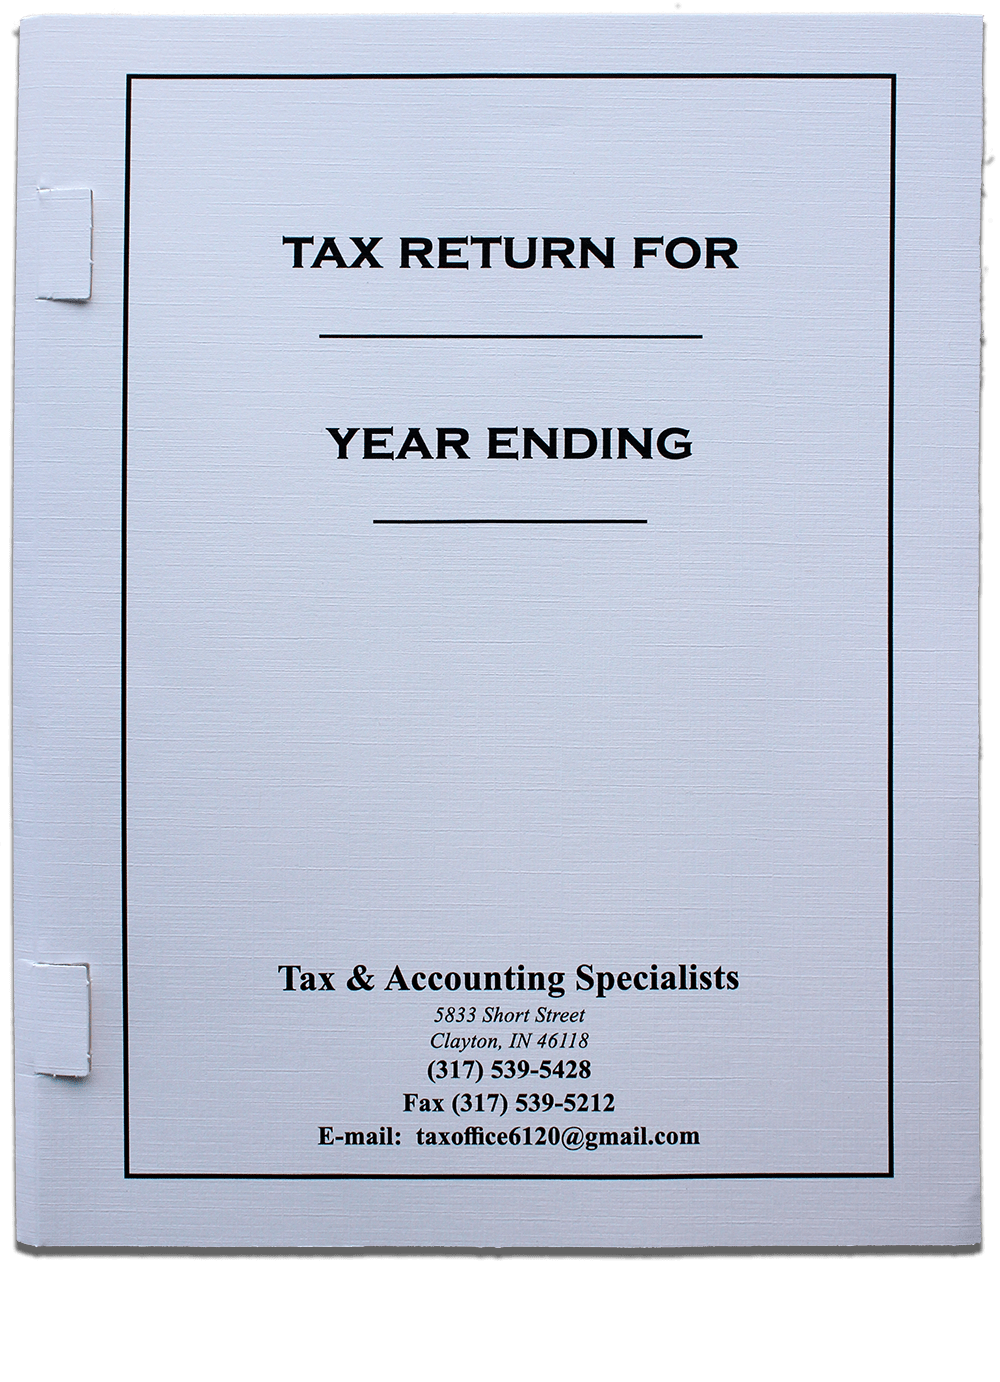 Custom Tax Return Folder with Side Tabs, Write In Client Name and Tax Year - DiscountTaxForms.com